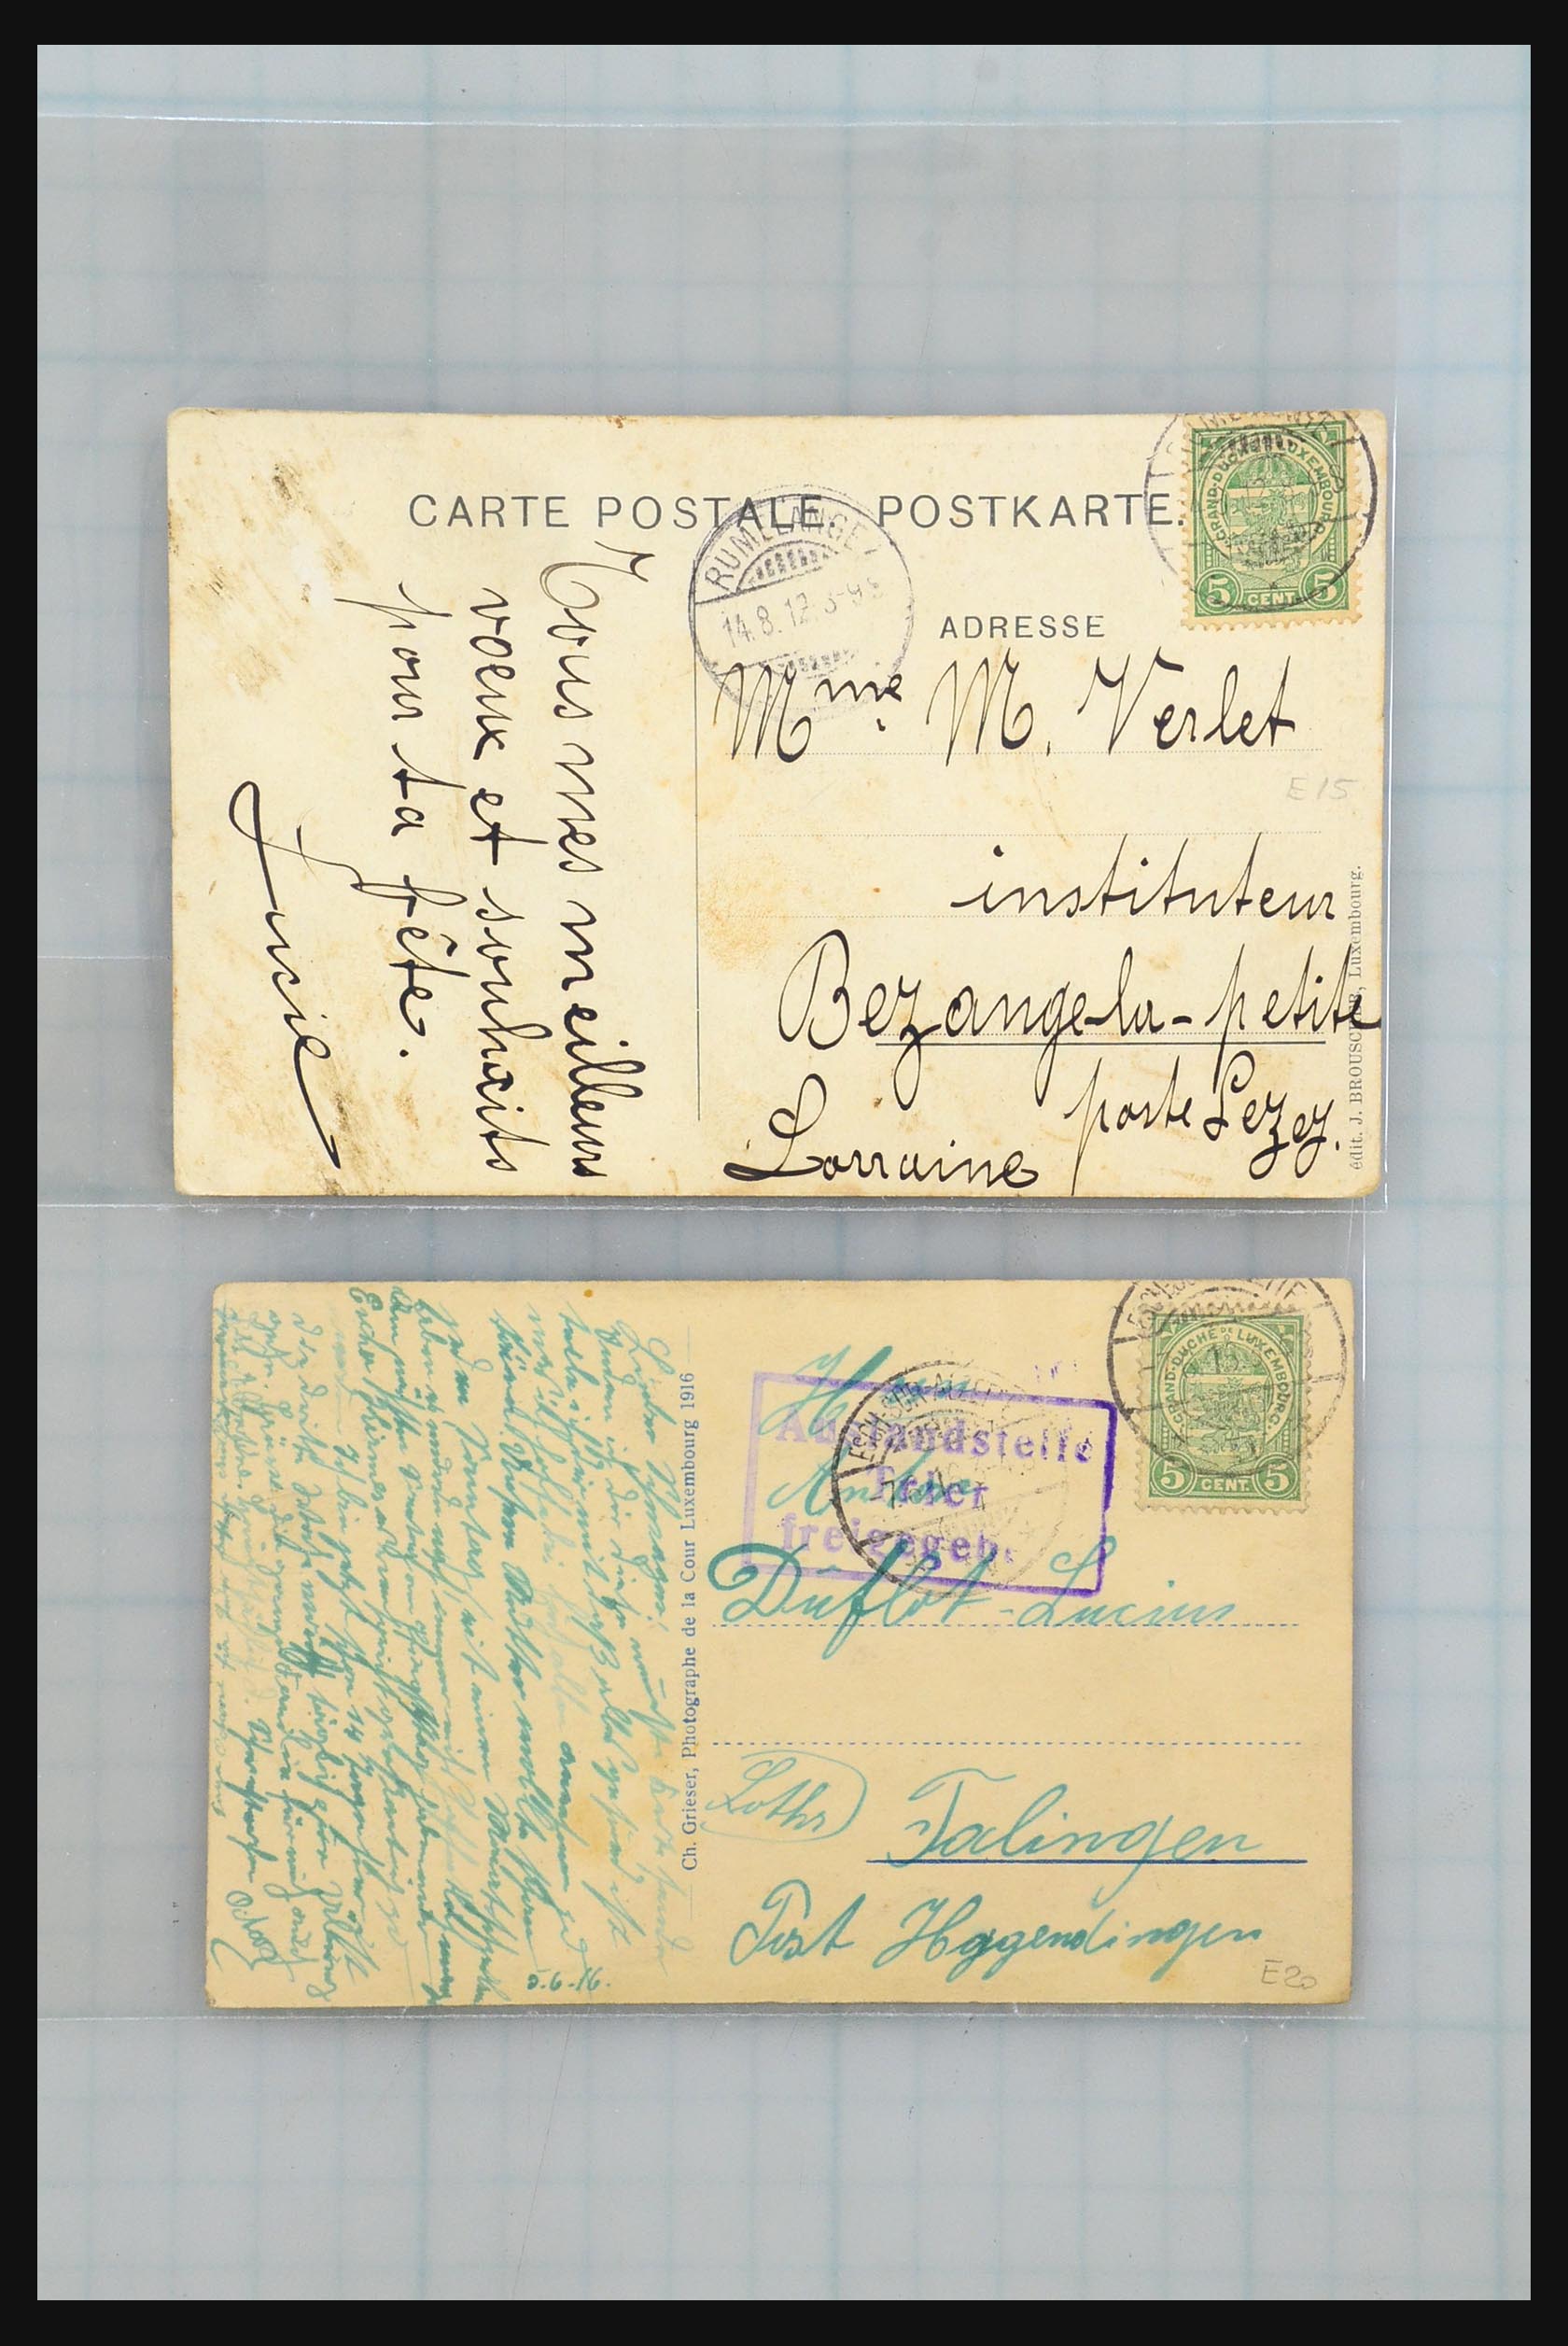 31358 011 - 31358 Portugal/Luxemburg/Greece covers 1880-1960.